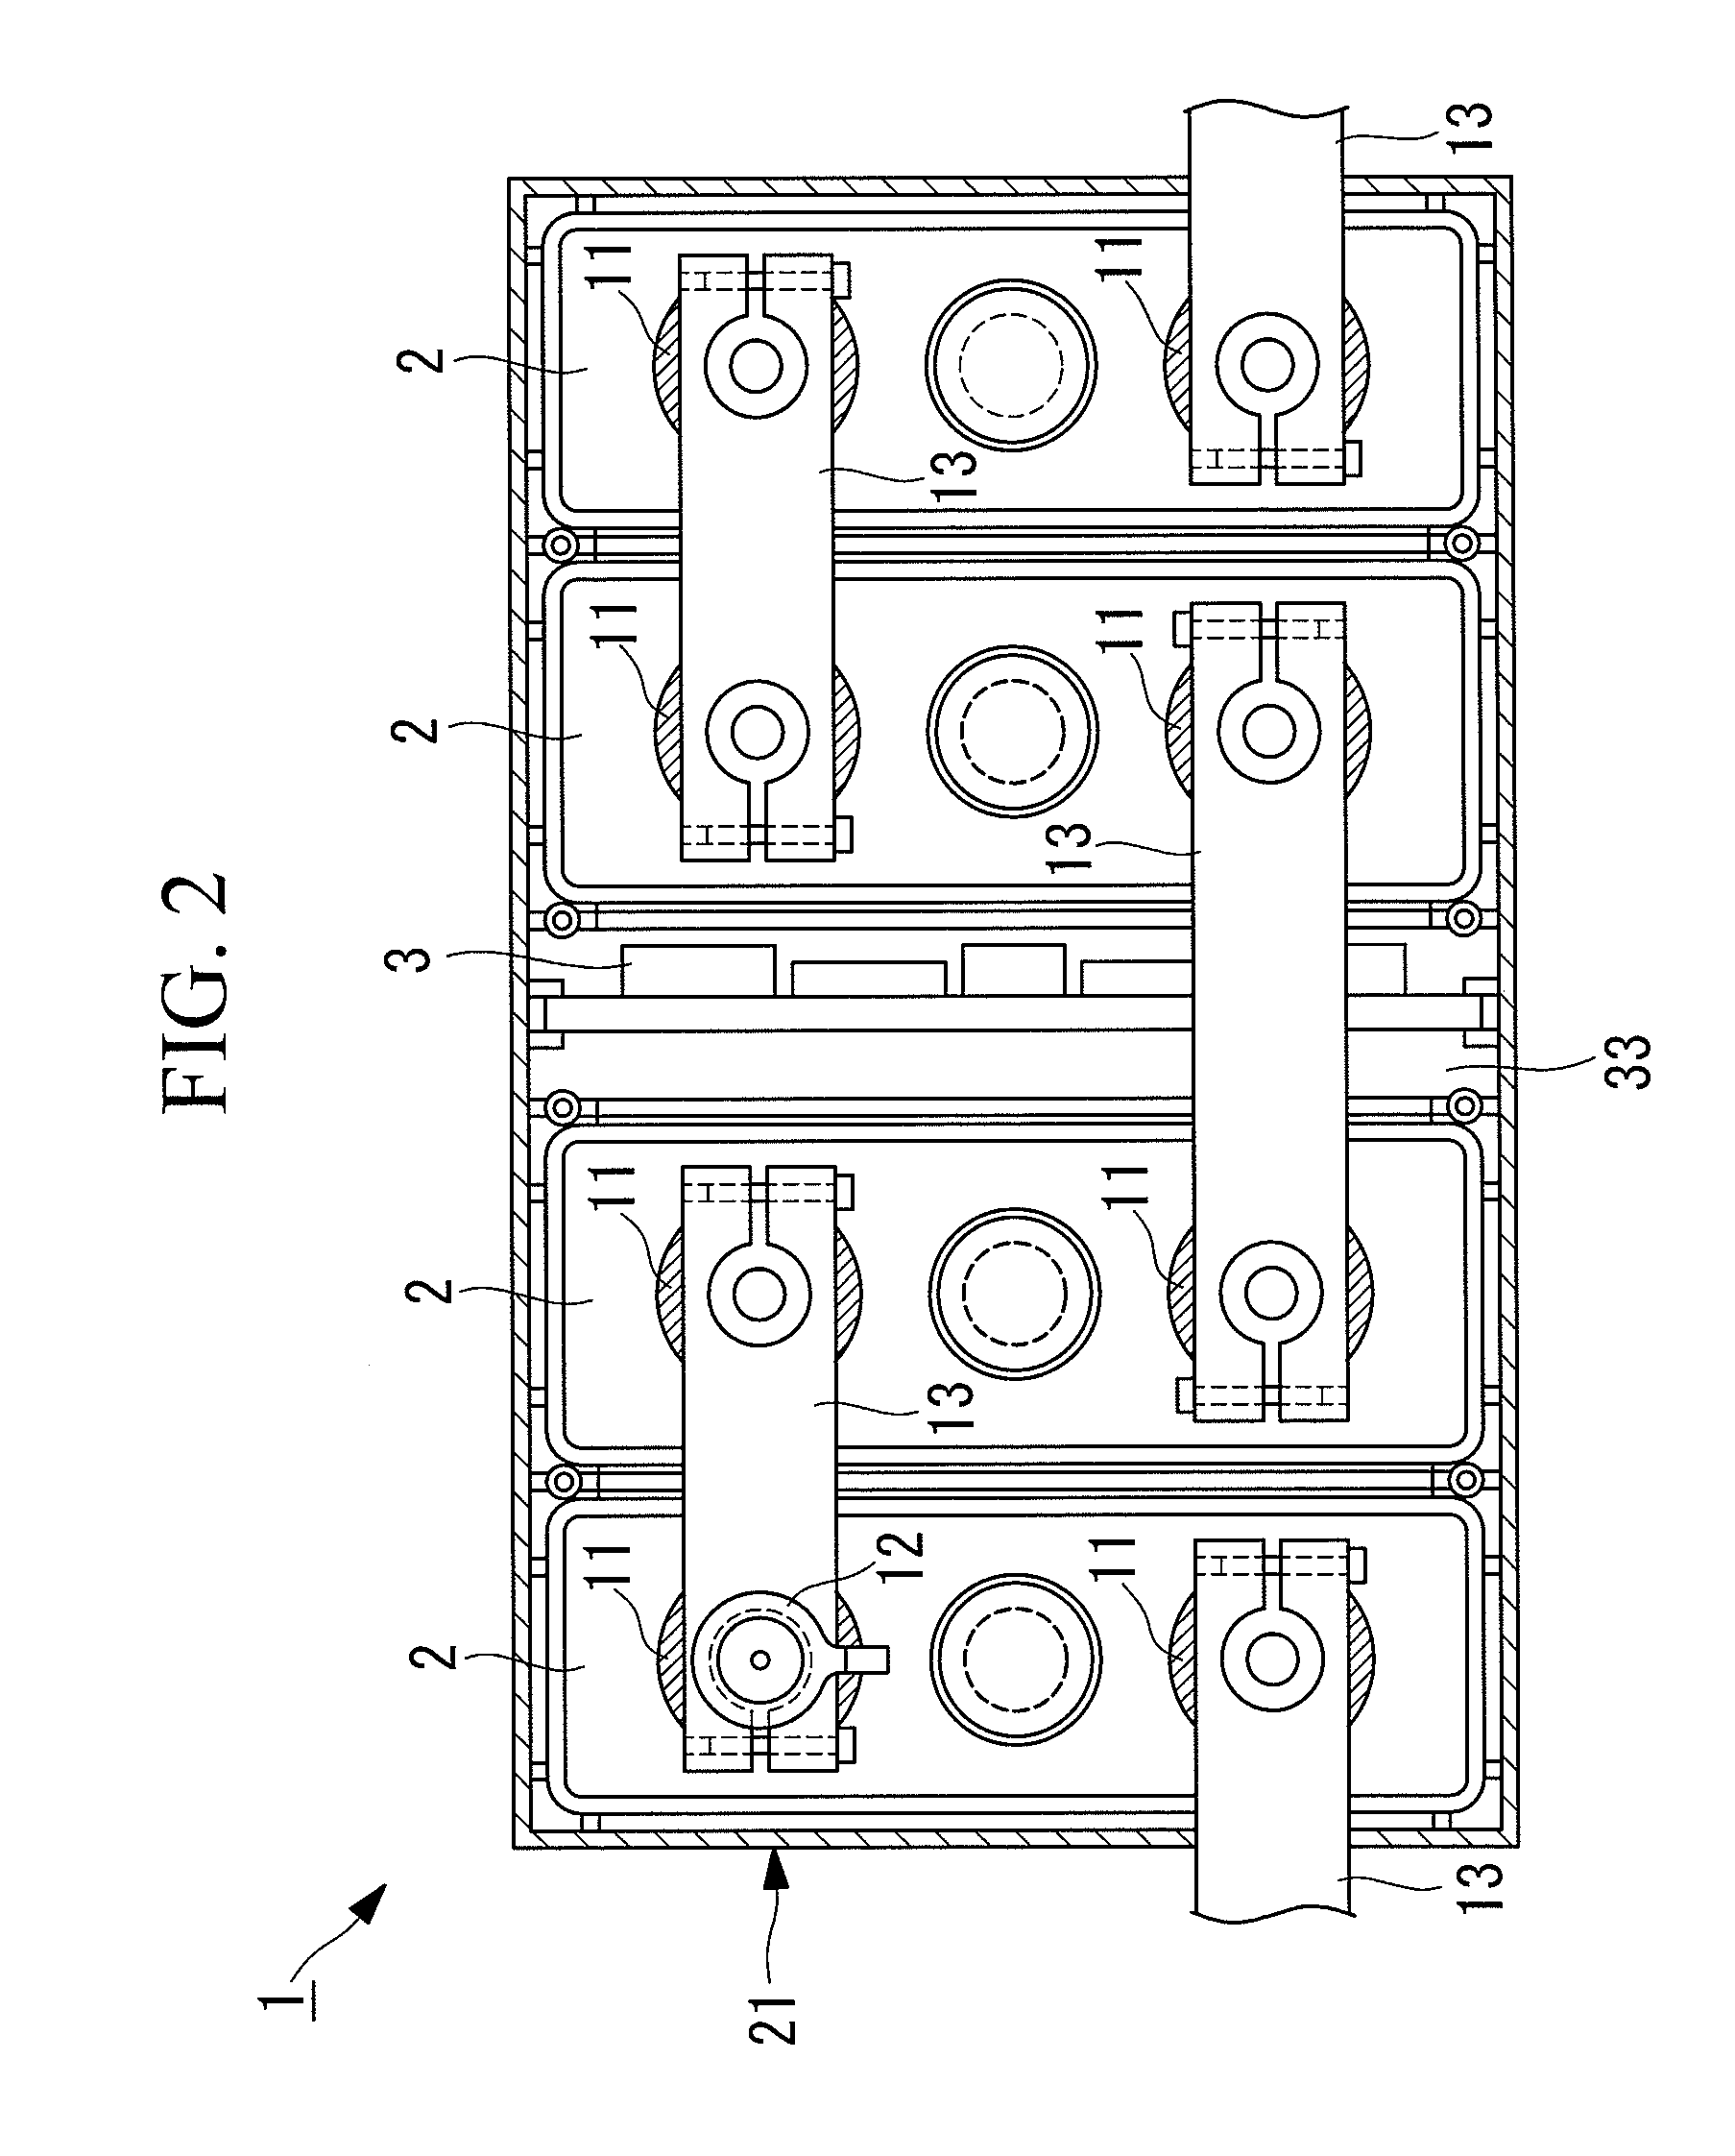 Cell container and battery